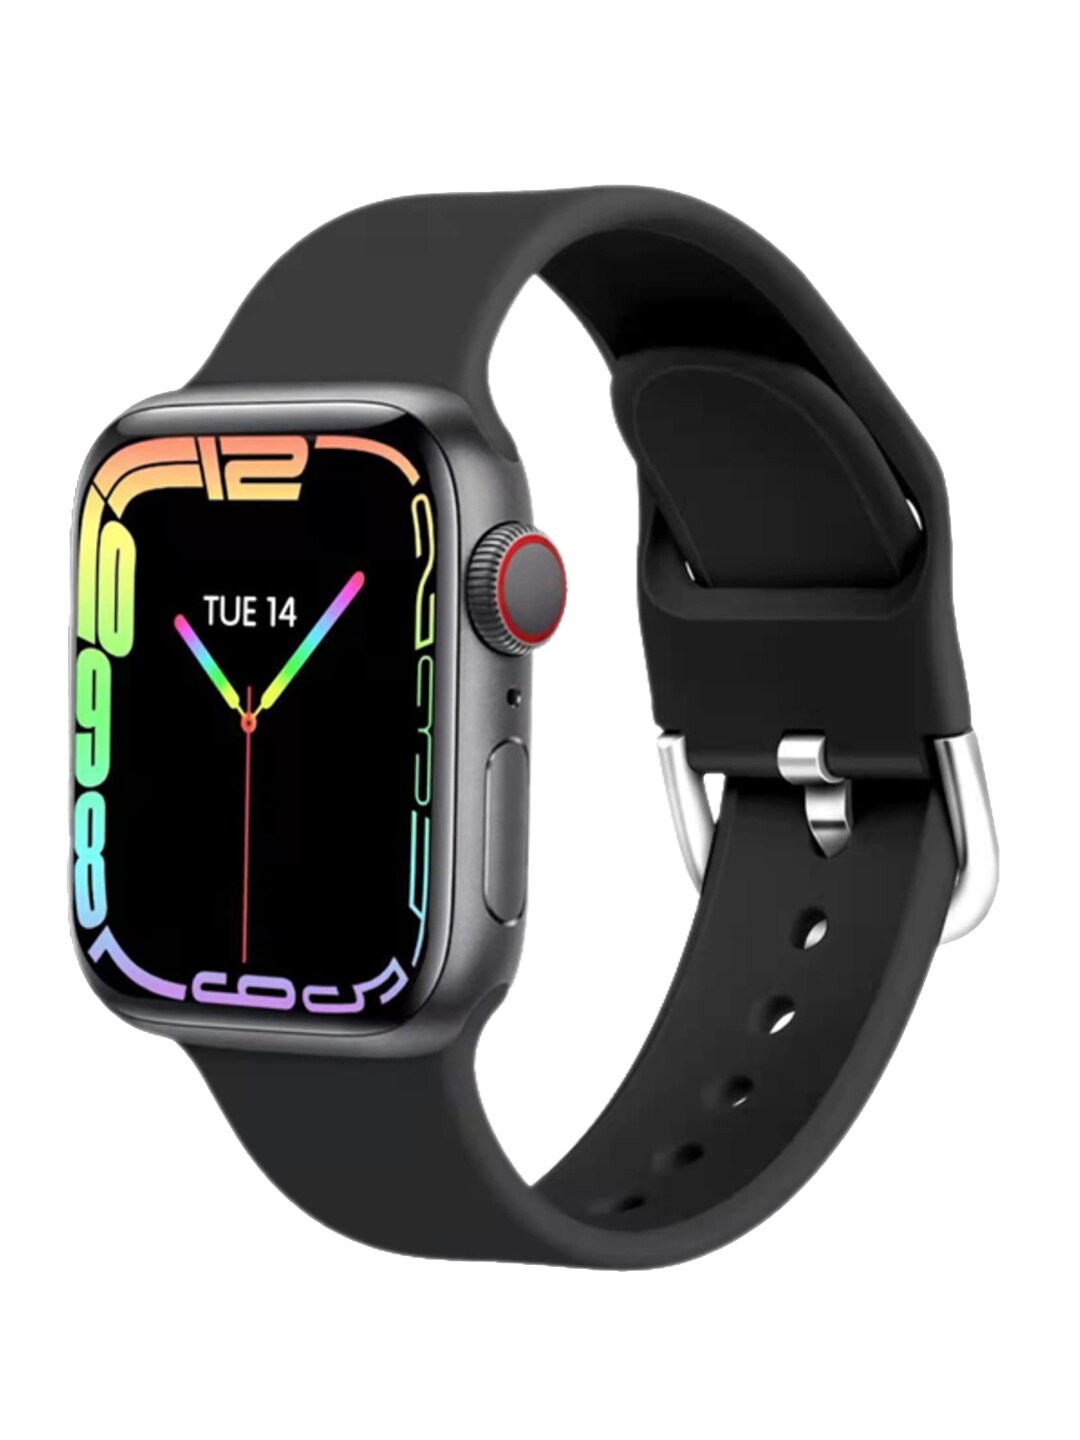 I KALL Black Solid W6 Smart Watch Price in India